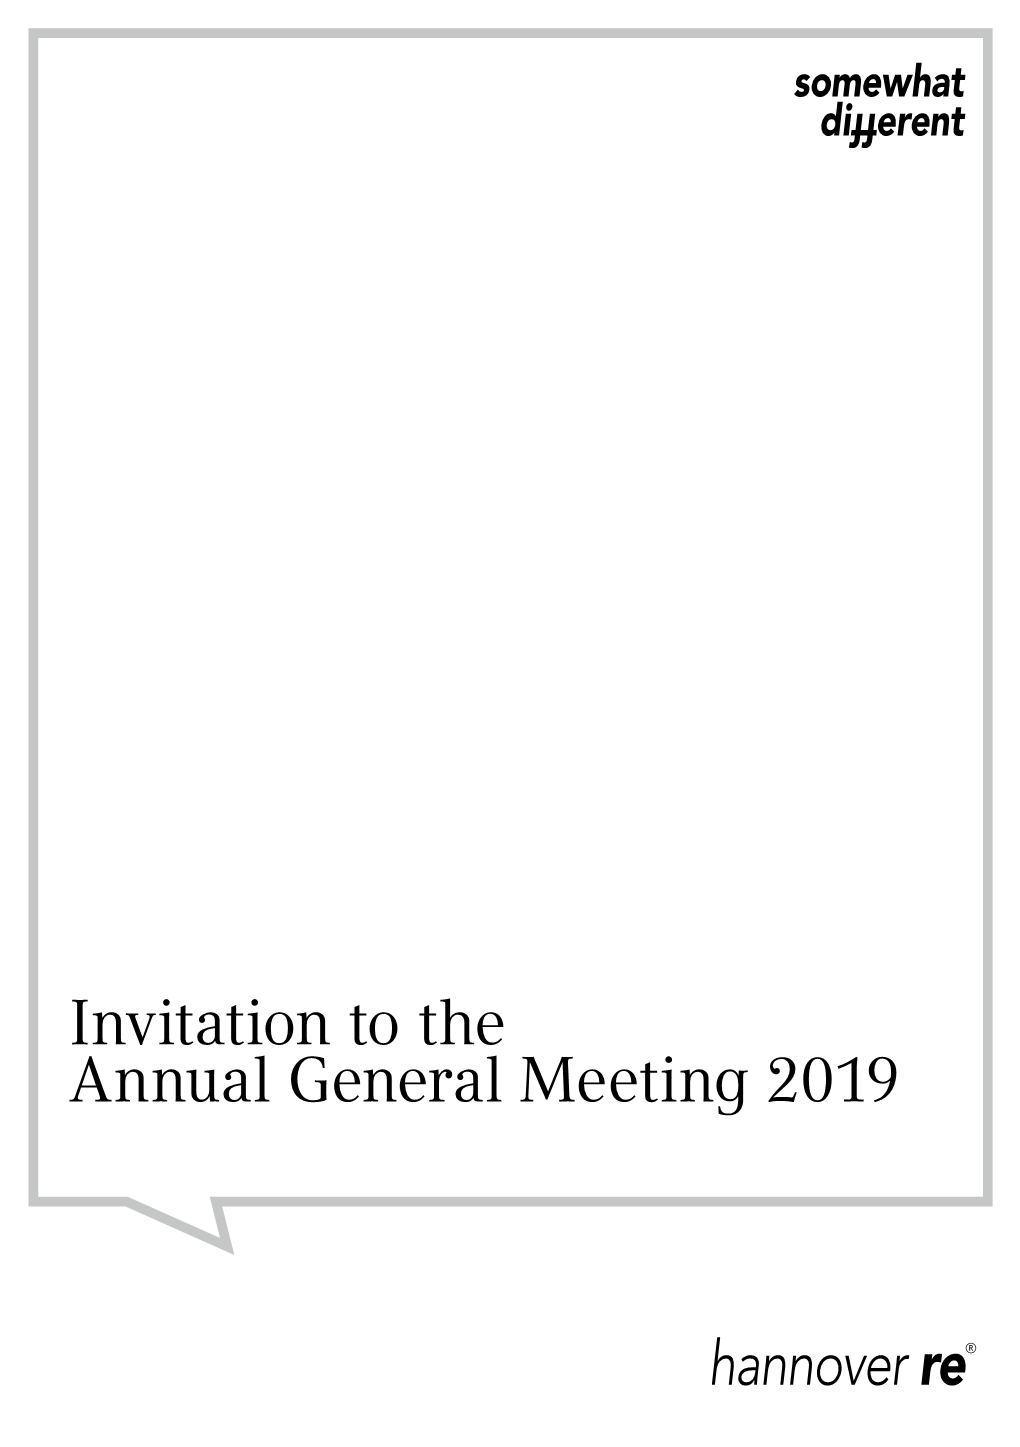 Invitation to the Annual General Meeting 2019